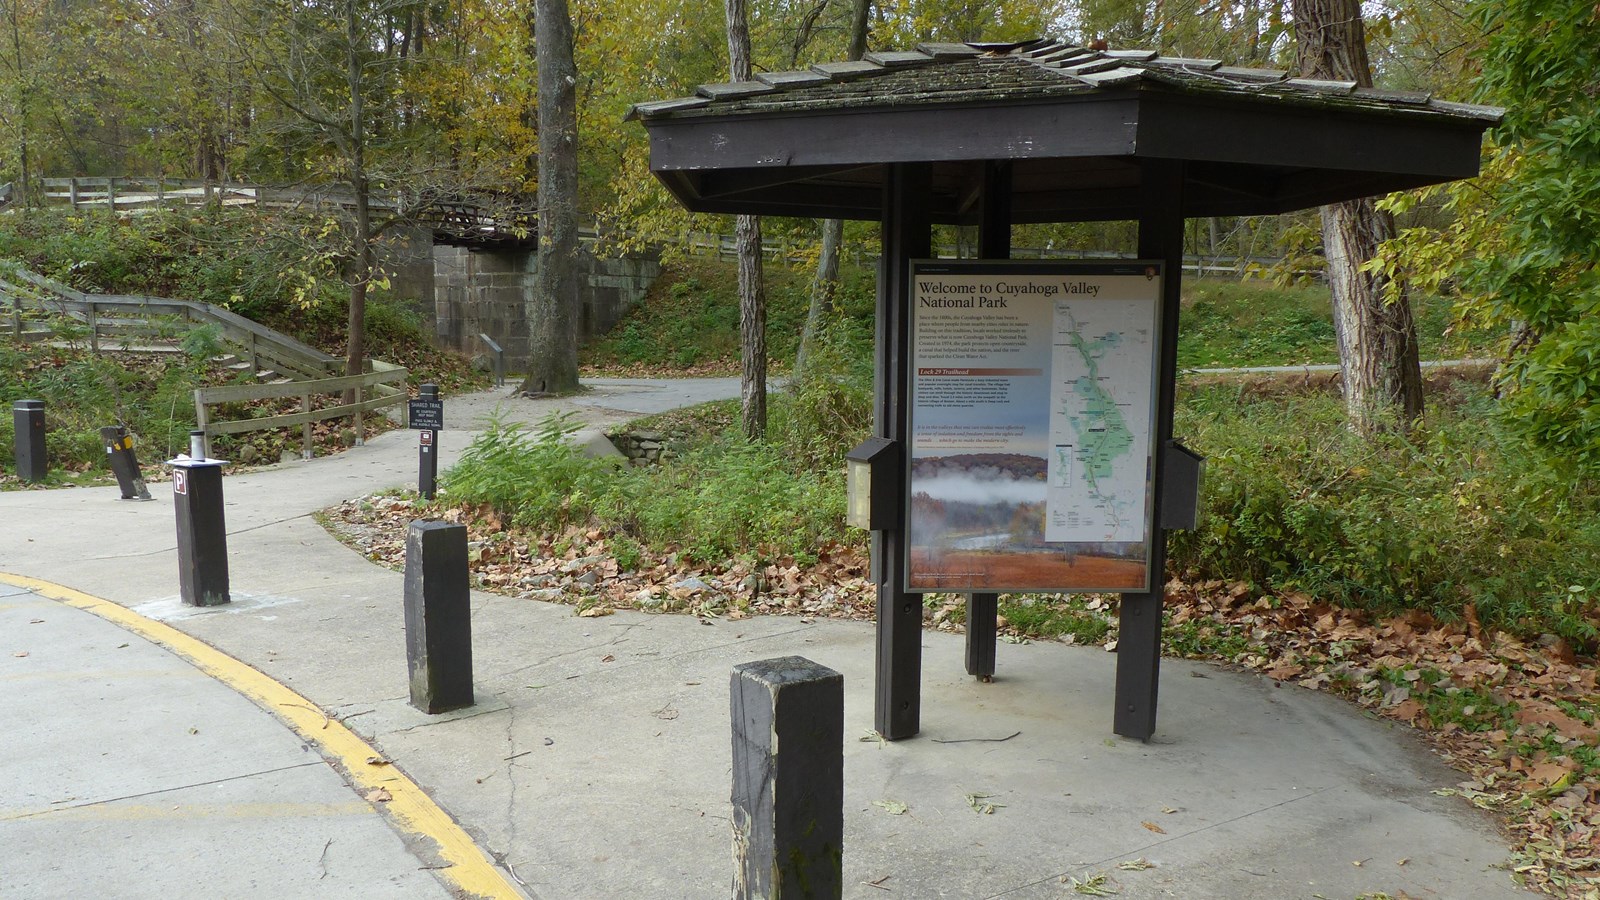 Three sided kiosk beside parking lot posts. A paved path leads to a stone lock and wooded trail.